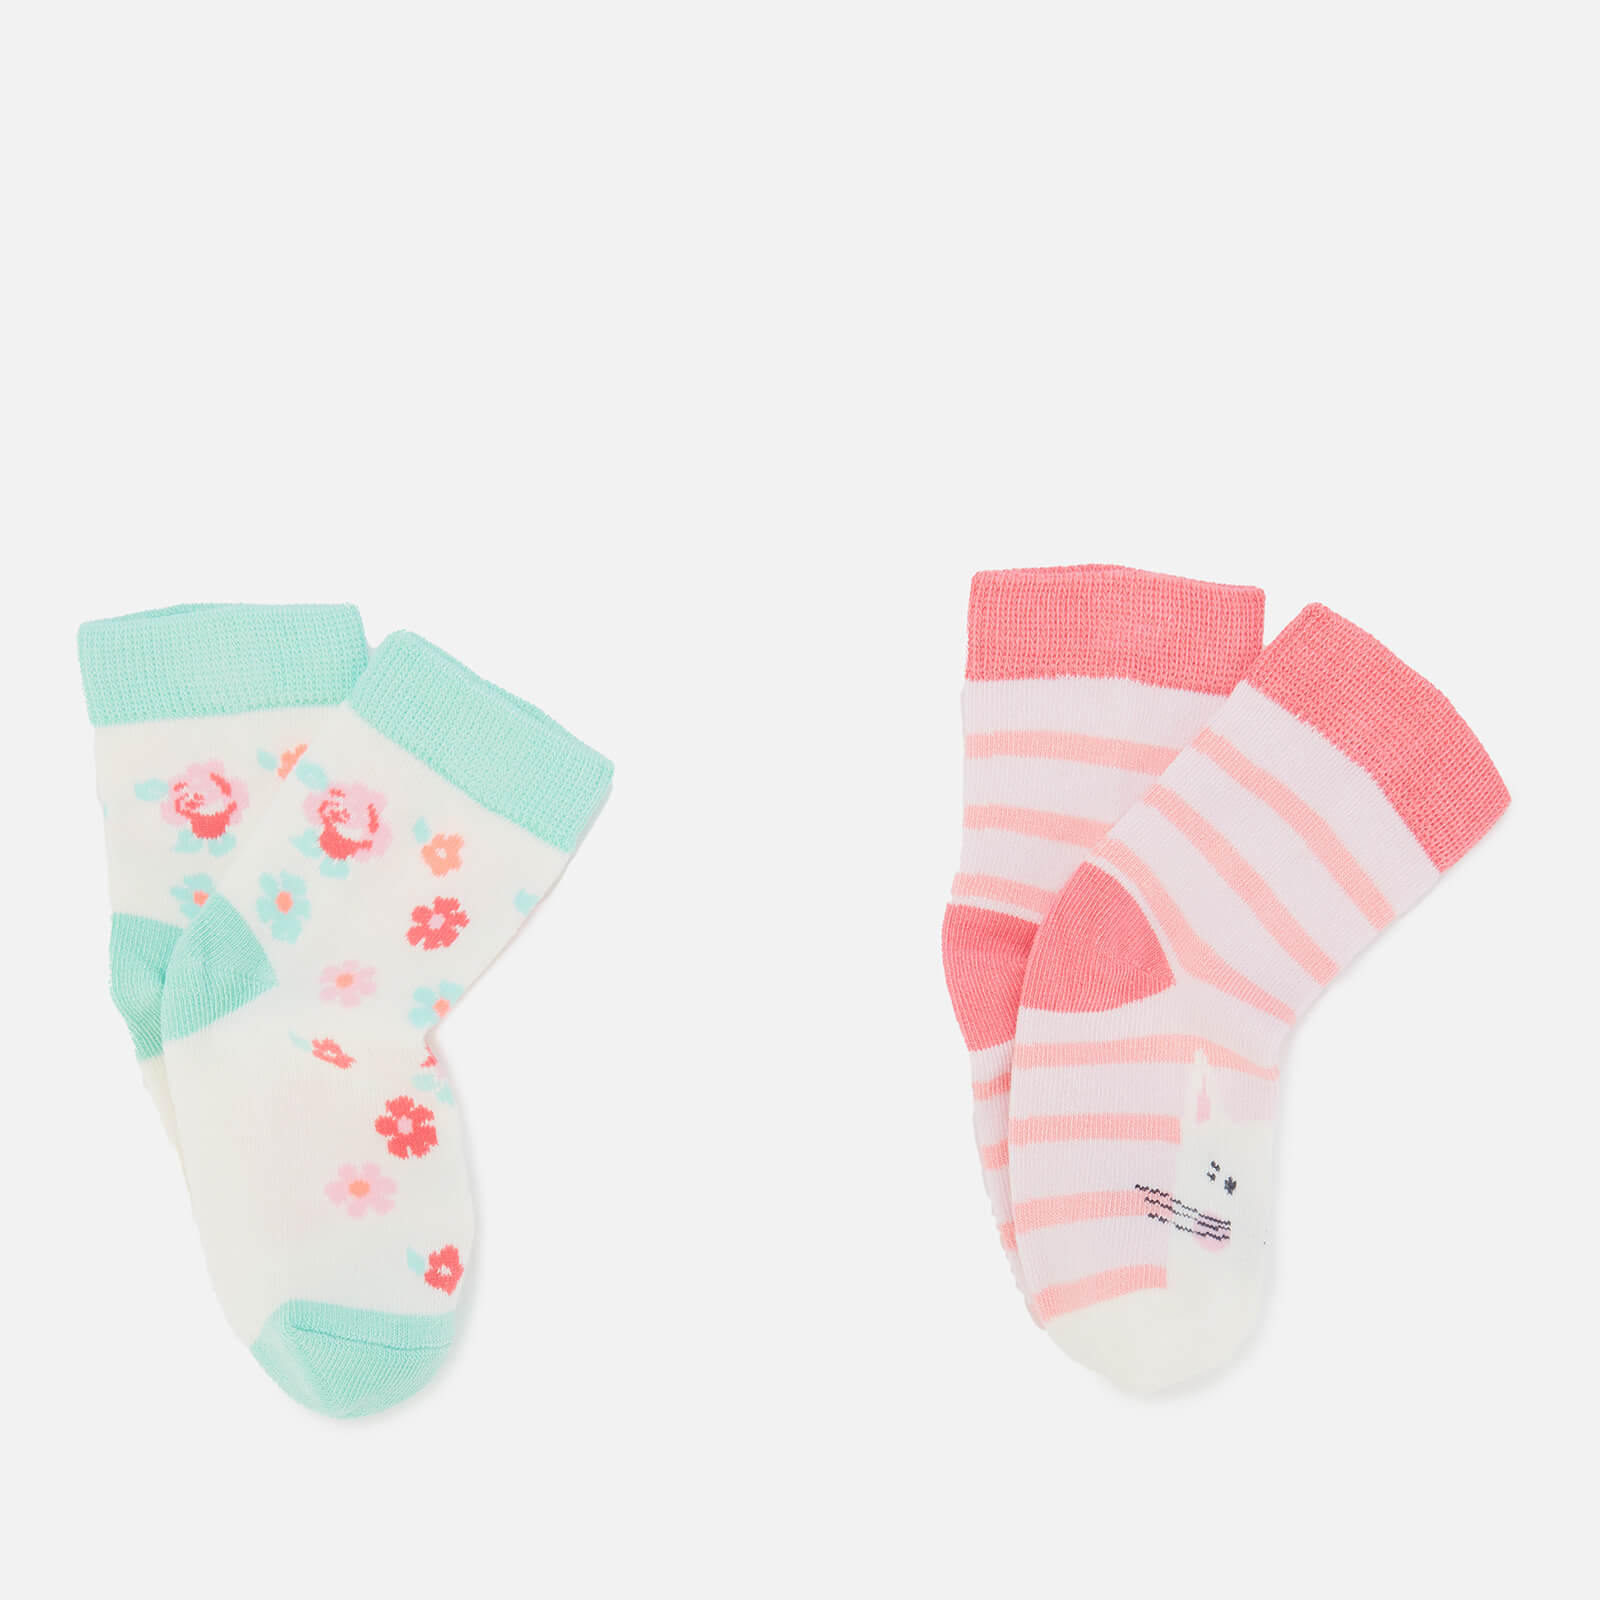 Joules Baby Floral and Cat Socks (2 Pack) - 0-6 Months